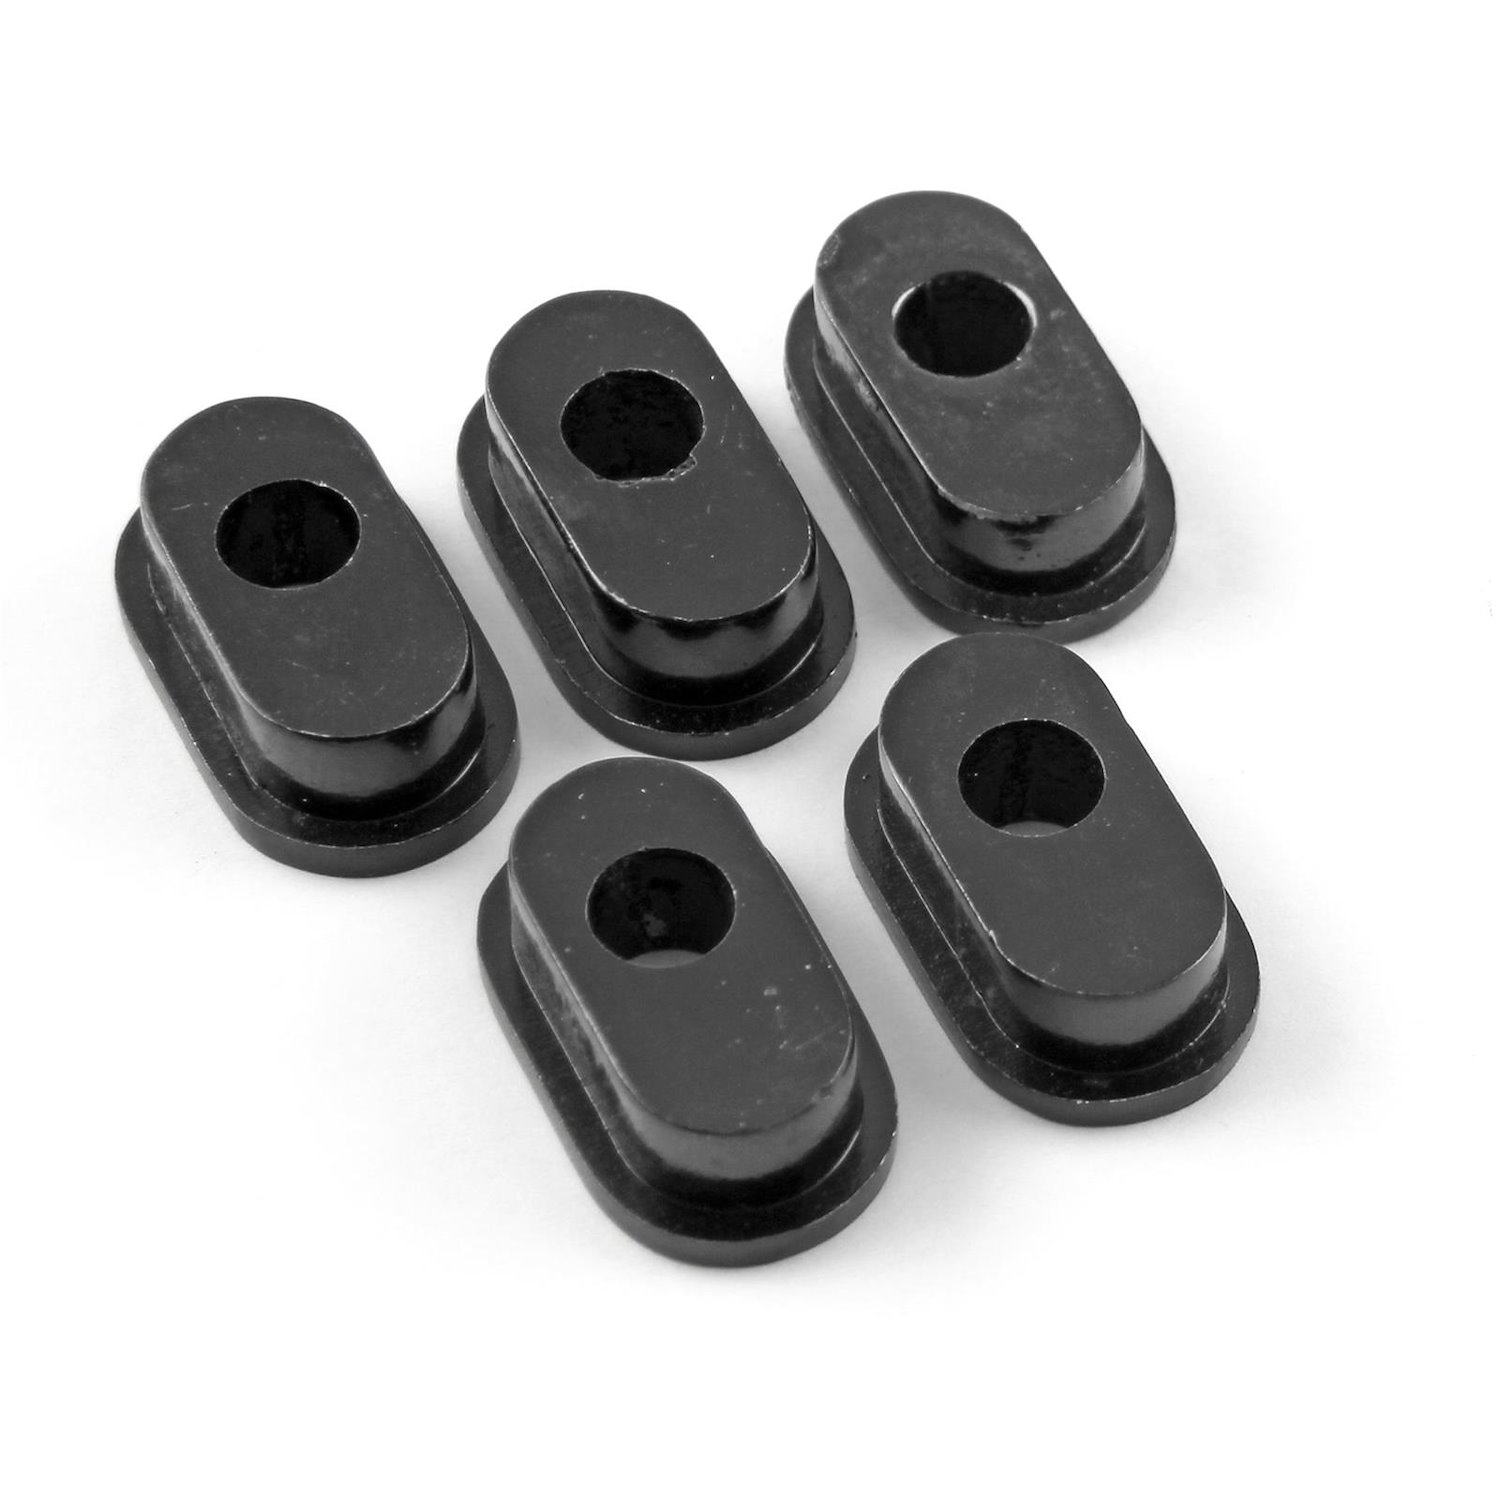 Replacement Caster Bushings For Tds4003 A-Arms